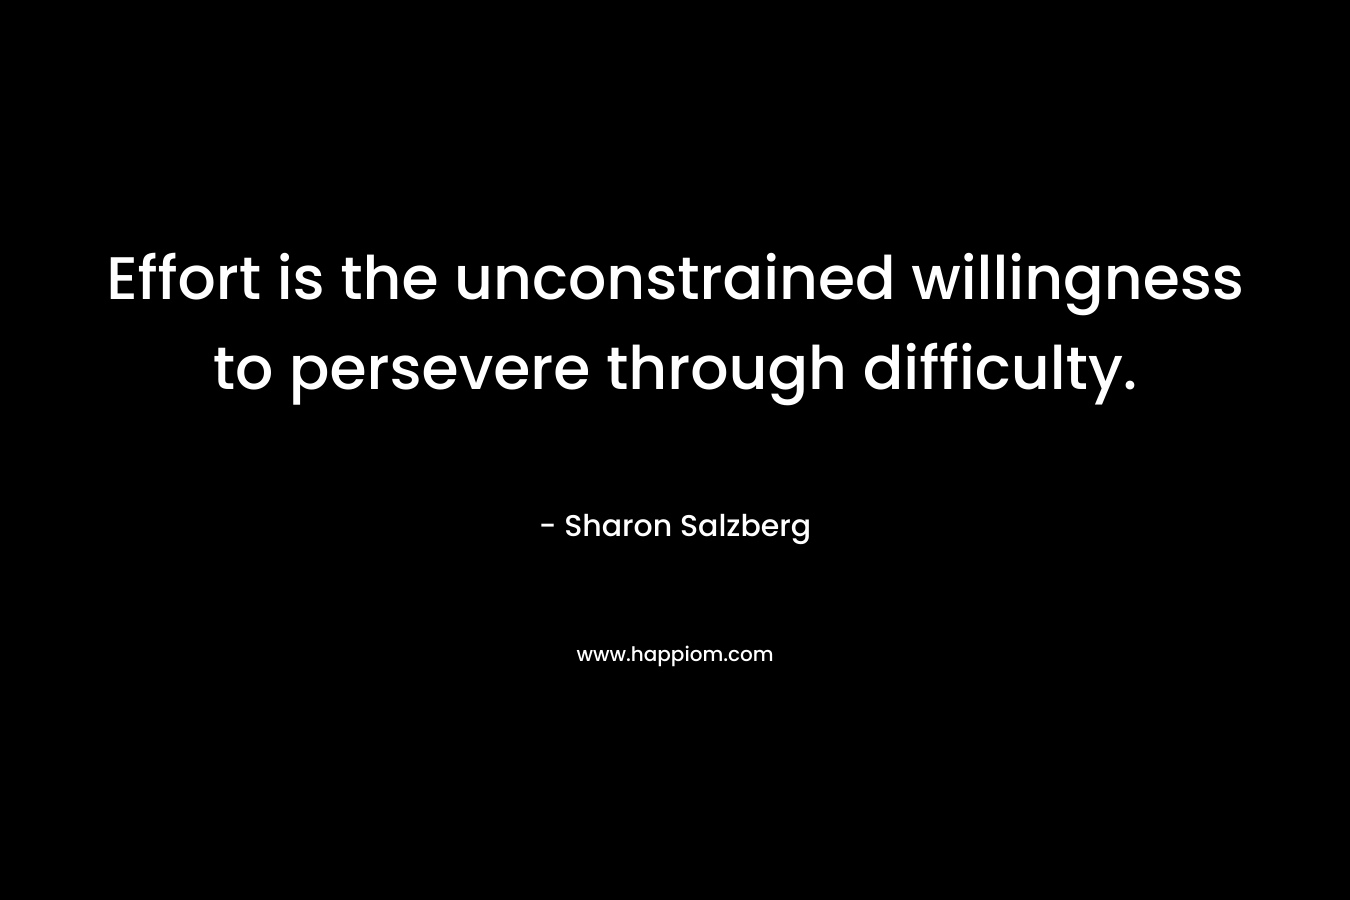 Effort is the unconstrained willingness to persevere through difficulty. – Sharon Salzberg